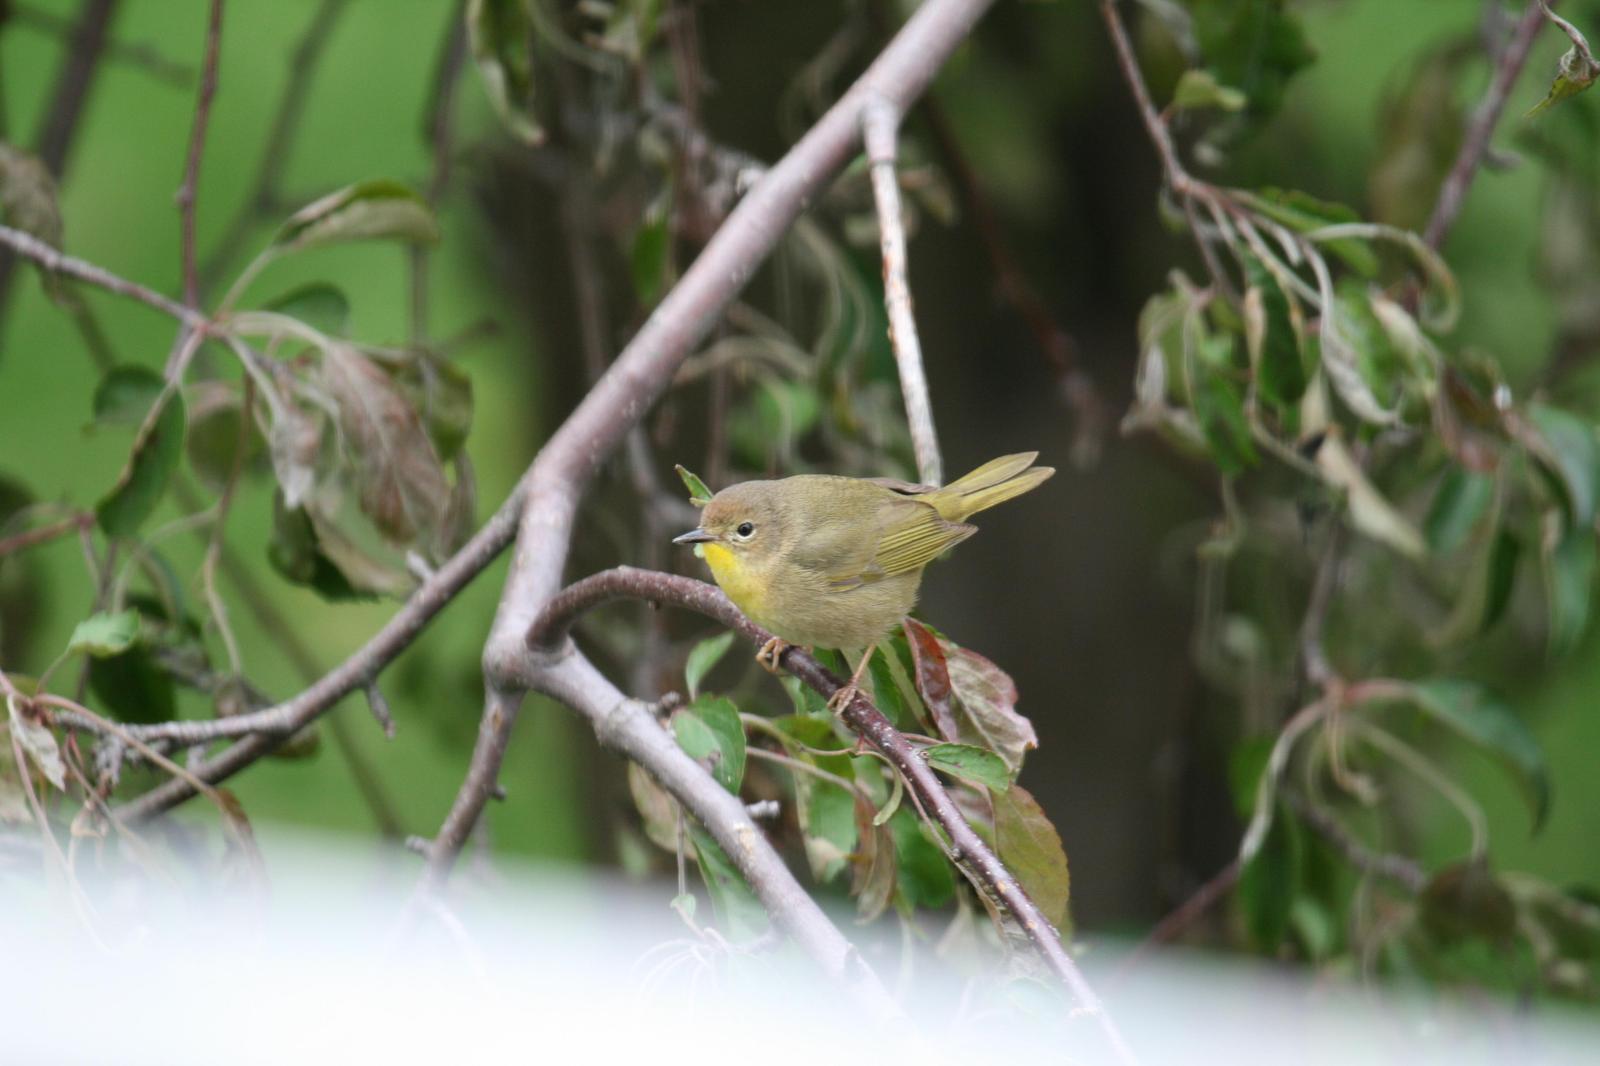 Common Yellowthroat Photo by Roseanne CALECA